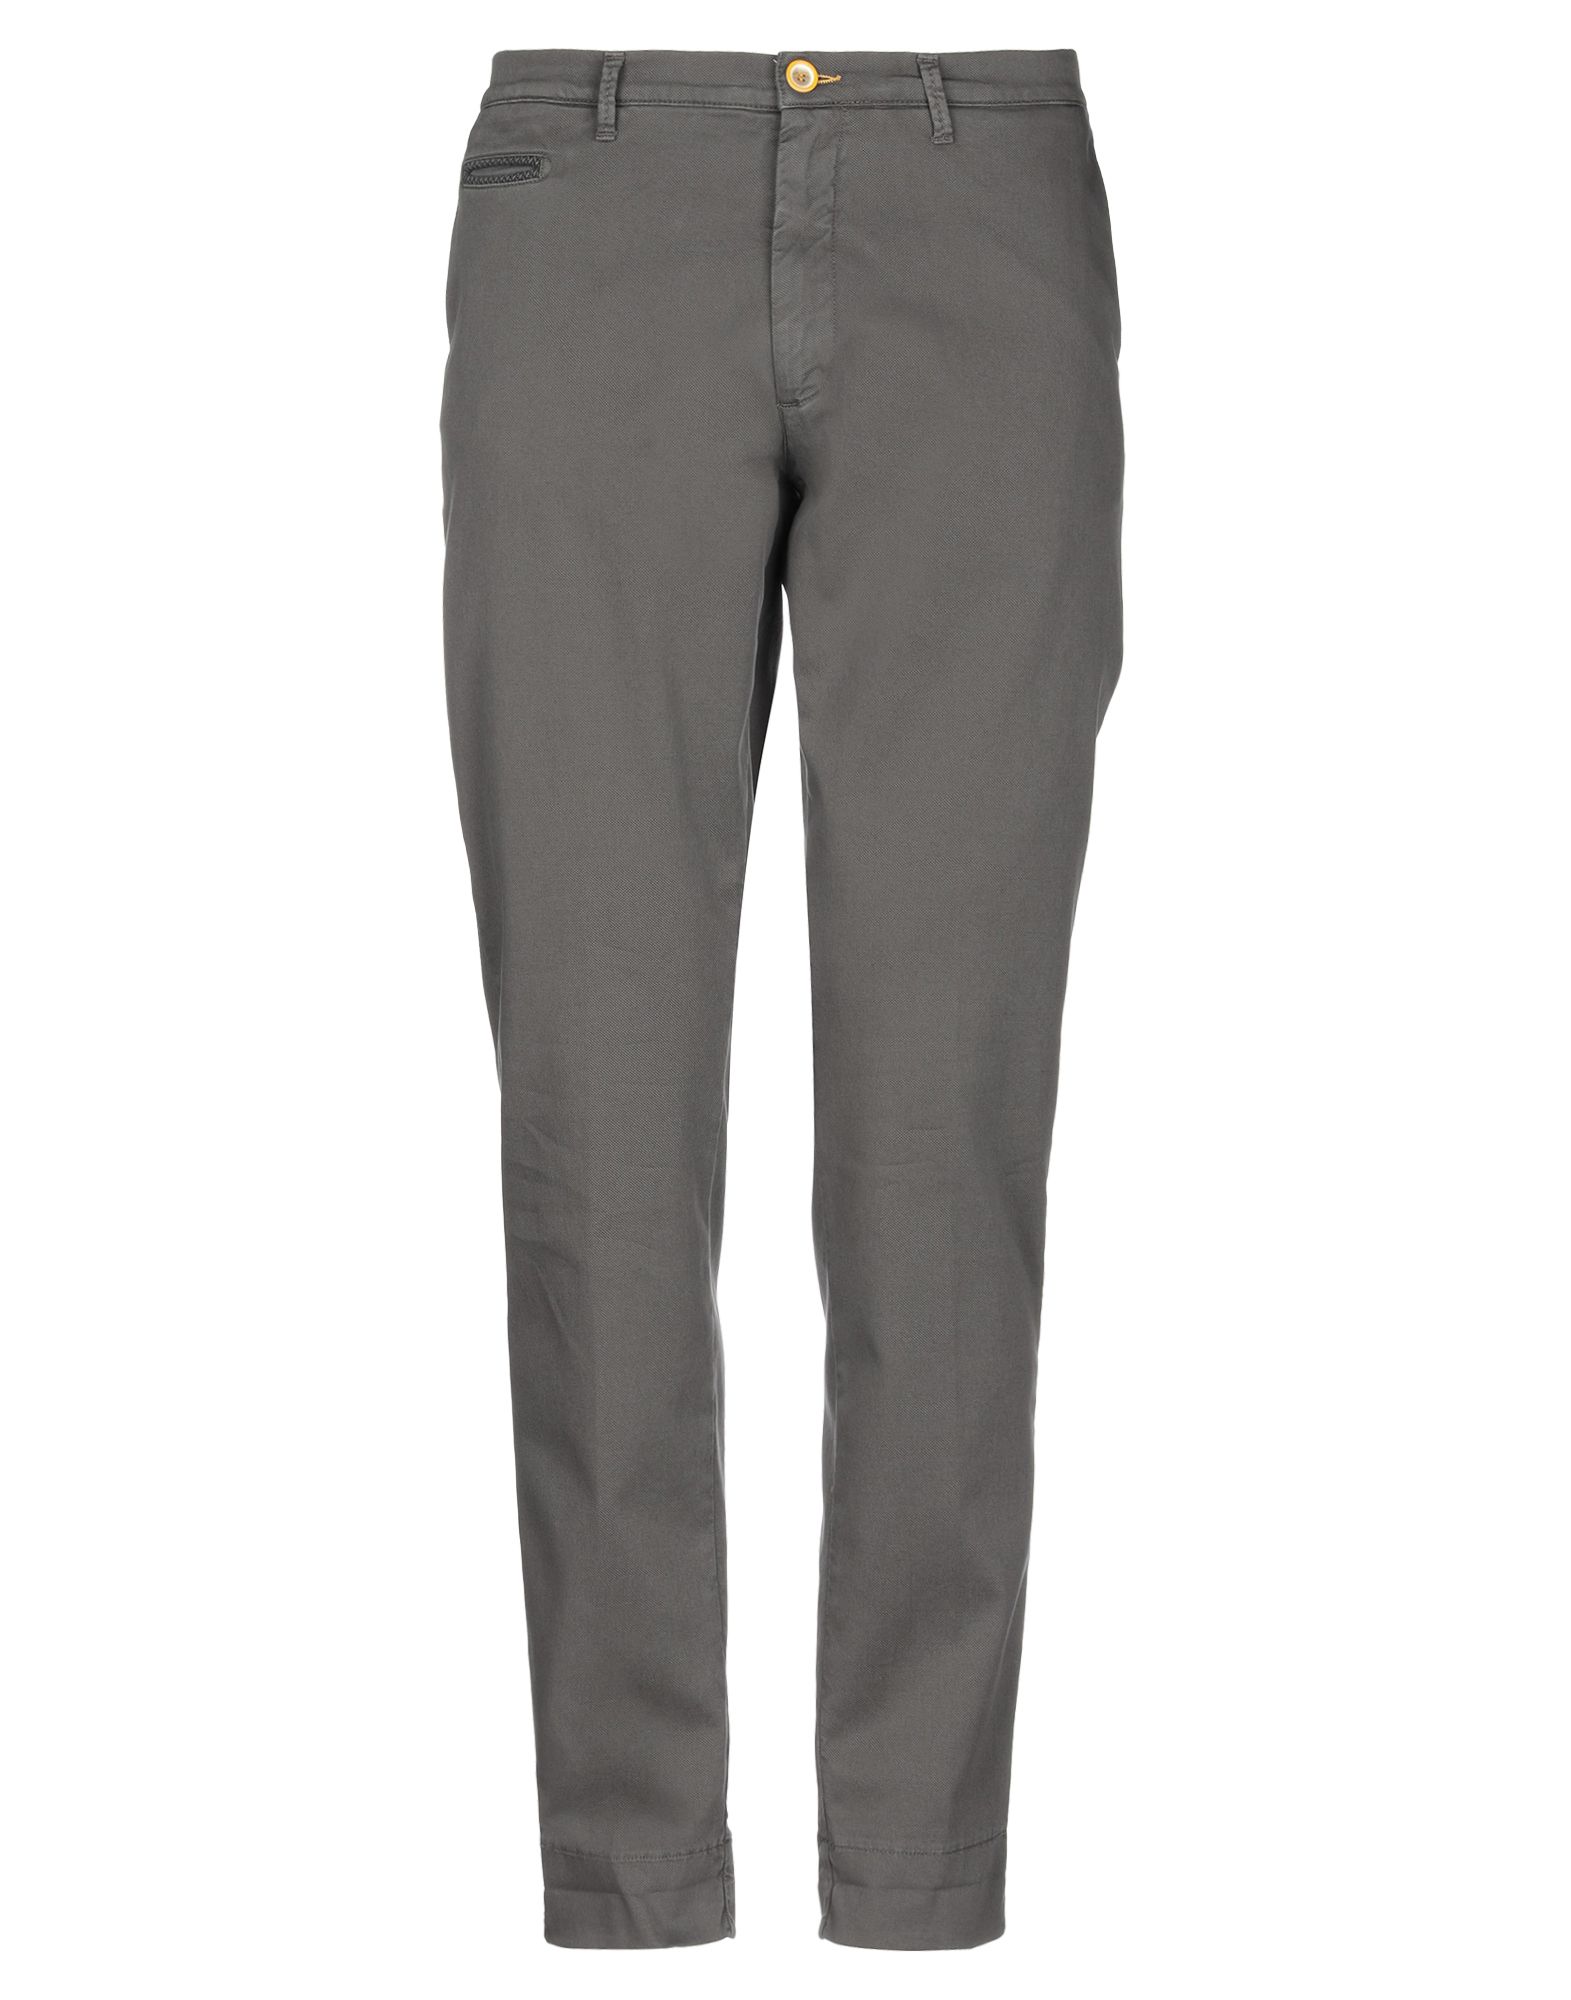 QUOTA OTTO QUOTA OTTO Casual pants from yoox.com | Daily Mail